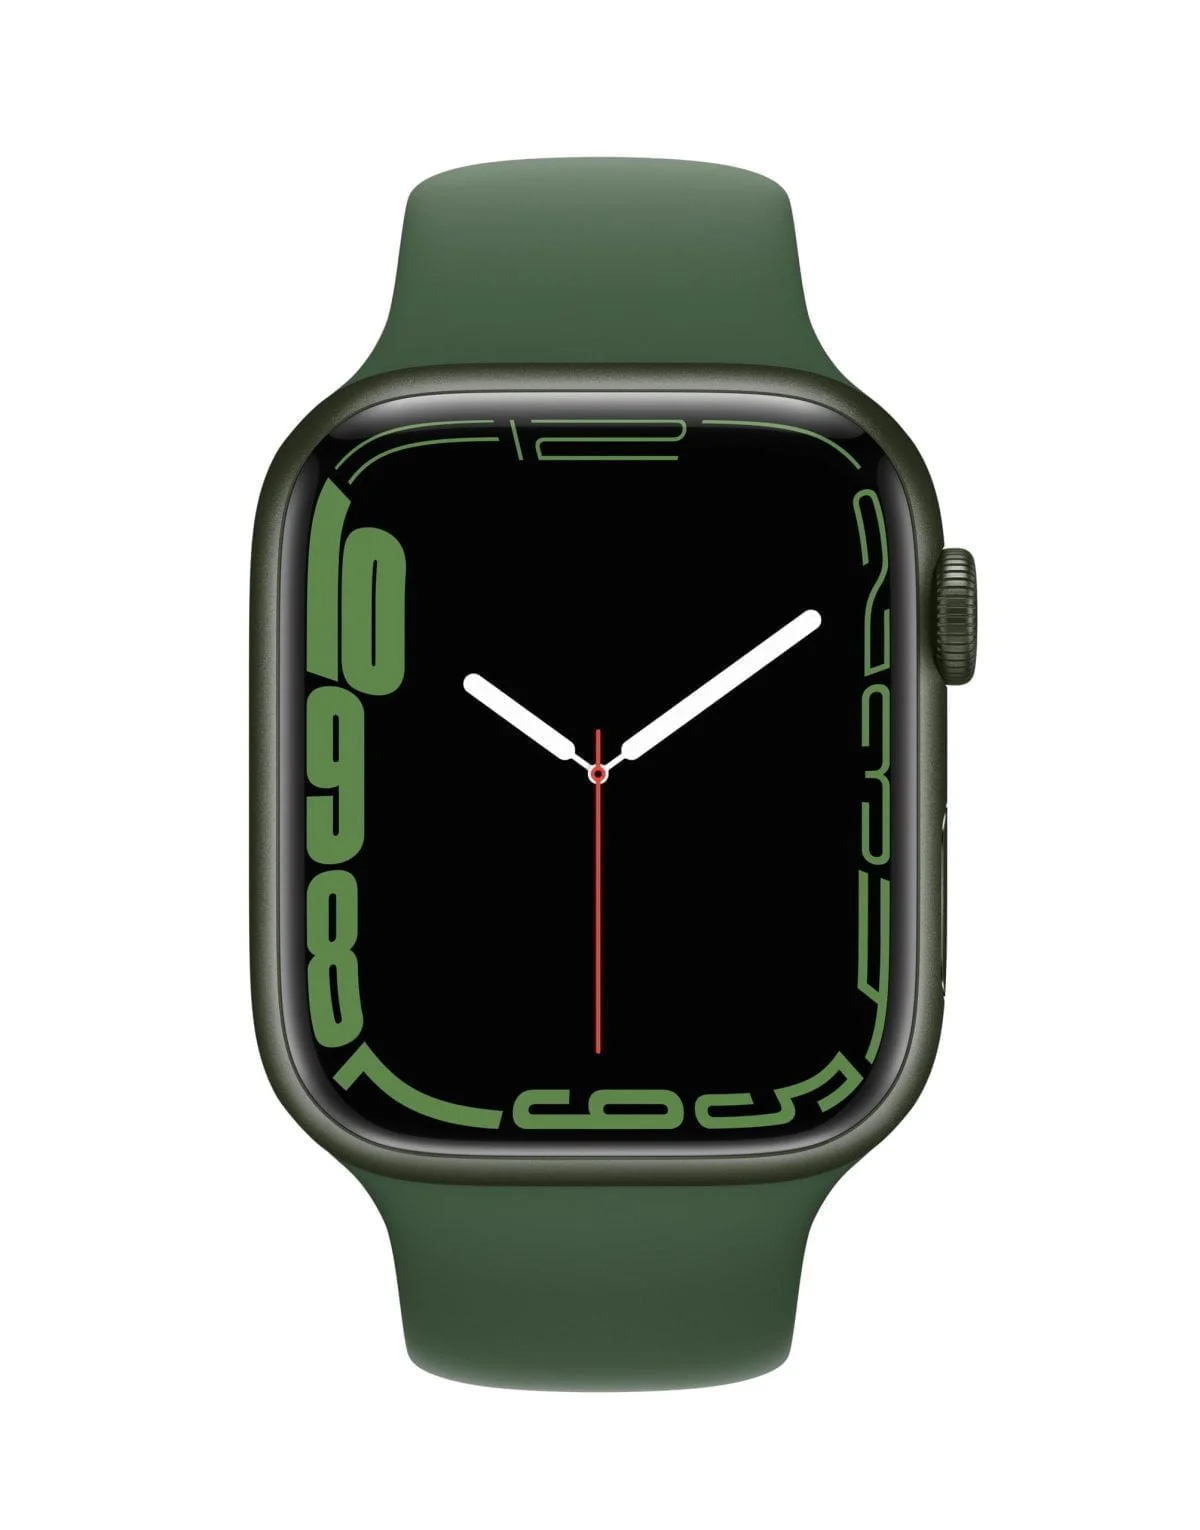 6215941Cv11D Scaled Apple &Lt;H1&Gt;Apple Watch Series 7 (Gps) 45Mm Green Aluminum Case With Clover Sport Band - Green&Lt;/H1&Gt; &Lt;H2&Gt;Model : Mkn73&Lt;/H2&Gt; &Lt;Div Class=&Quot;Long-Description-Container Body-Copy &Quot;&Gt; &Lt;Div Class=&Quot;Html-Fragment&Quot;&Gt; &Lt;Div&Gt; &Lt;Div&Gt;The Largest, Most Advanced Always-On Retina Display Yet Makes Everything You Do With Your Apple Watch Series 7 Bigger And Better. Series 7 Is The Most Durable Apple Watch Ever Built, With An Even More Crack-Resistant Front Crystal. Advanced Features Let You Measure Your Blood Oxygen Level,¹ Take An Ecg Anytime, And Access Mindfulness And Sleep Tracking Apps. You Can Also Track Dozens Of Workouts, Including New Tai Chi And Pilates.&Lt;/Div&Gt; &Lt;/Div&Gt; &Lt;/Div&Gt; &Lt;/Div&Gt; Apple Watch Series 7 Apple Watch Series 7 (Gps) 45Mm - Green